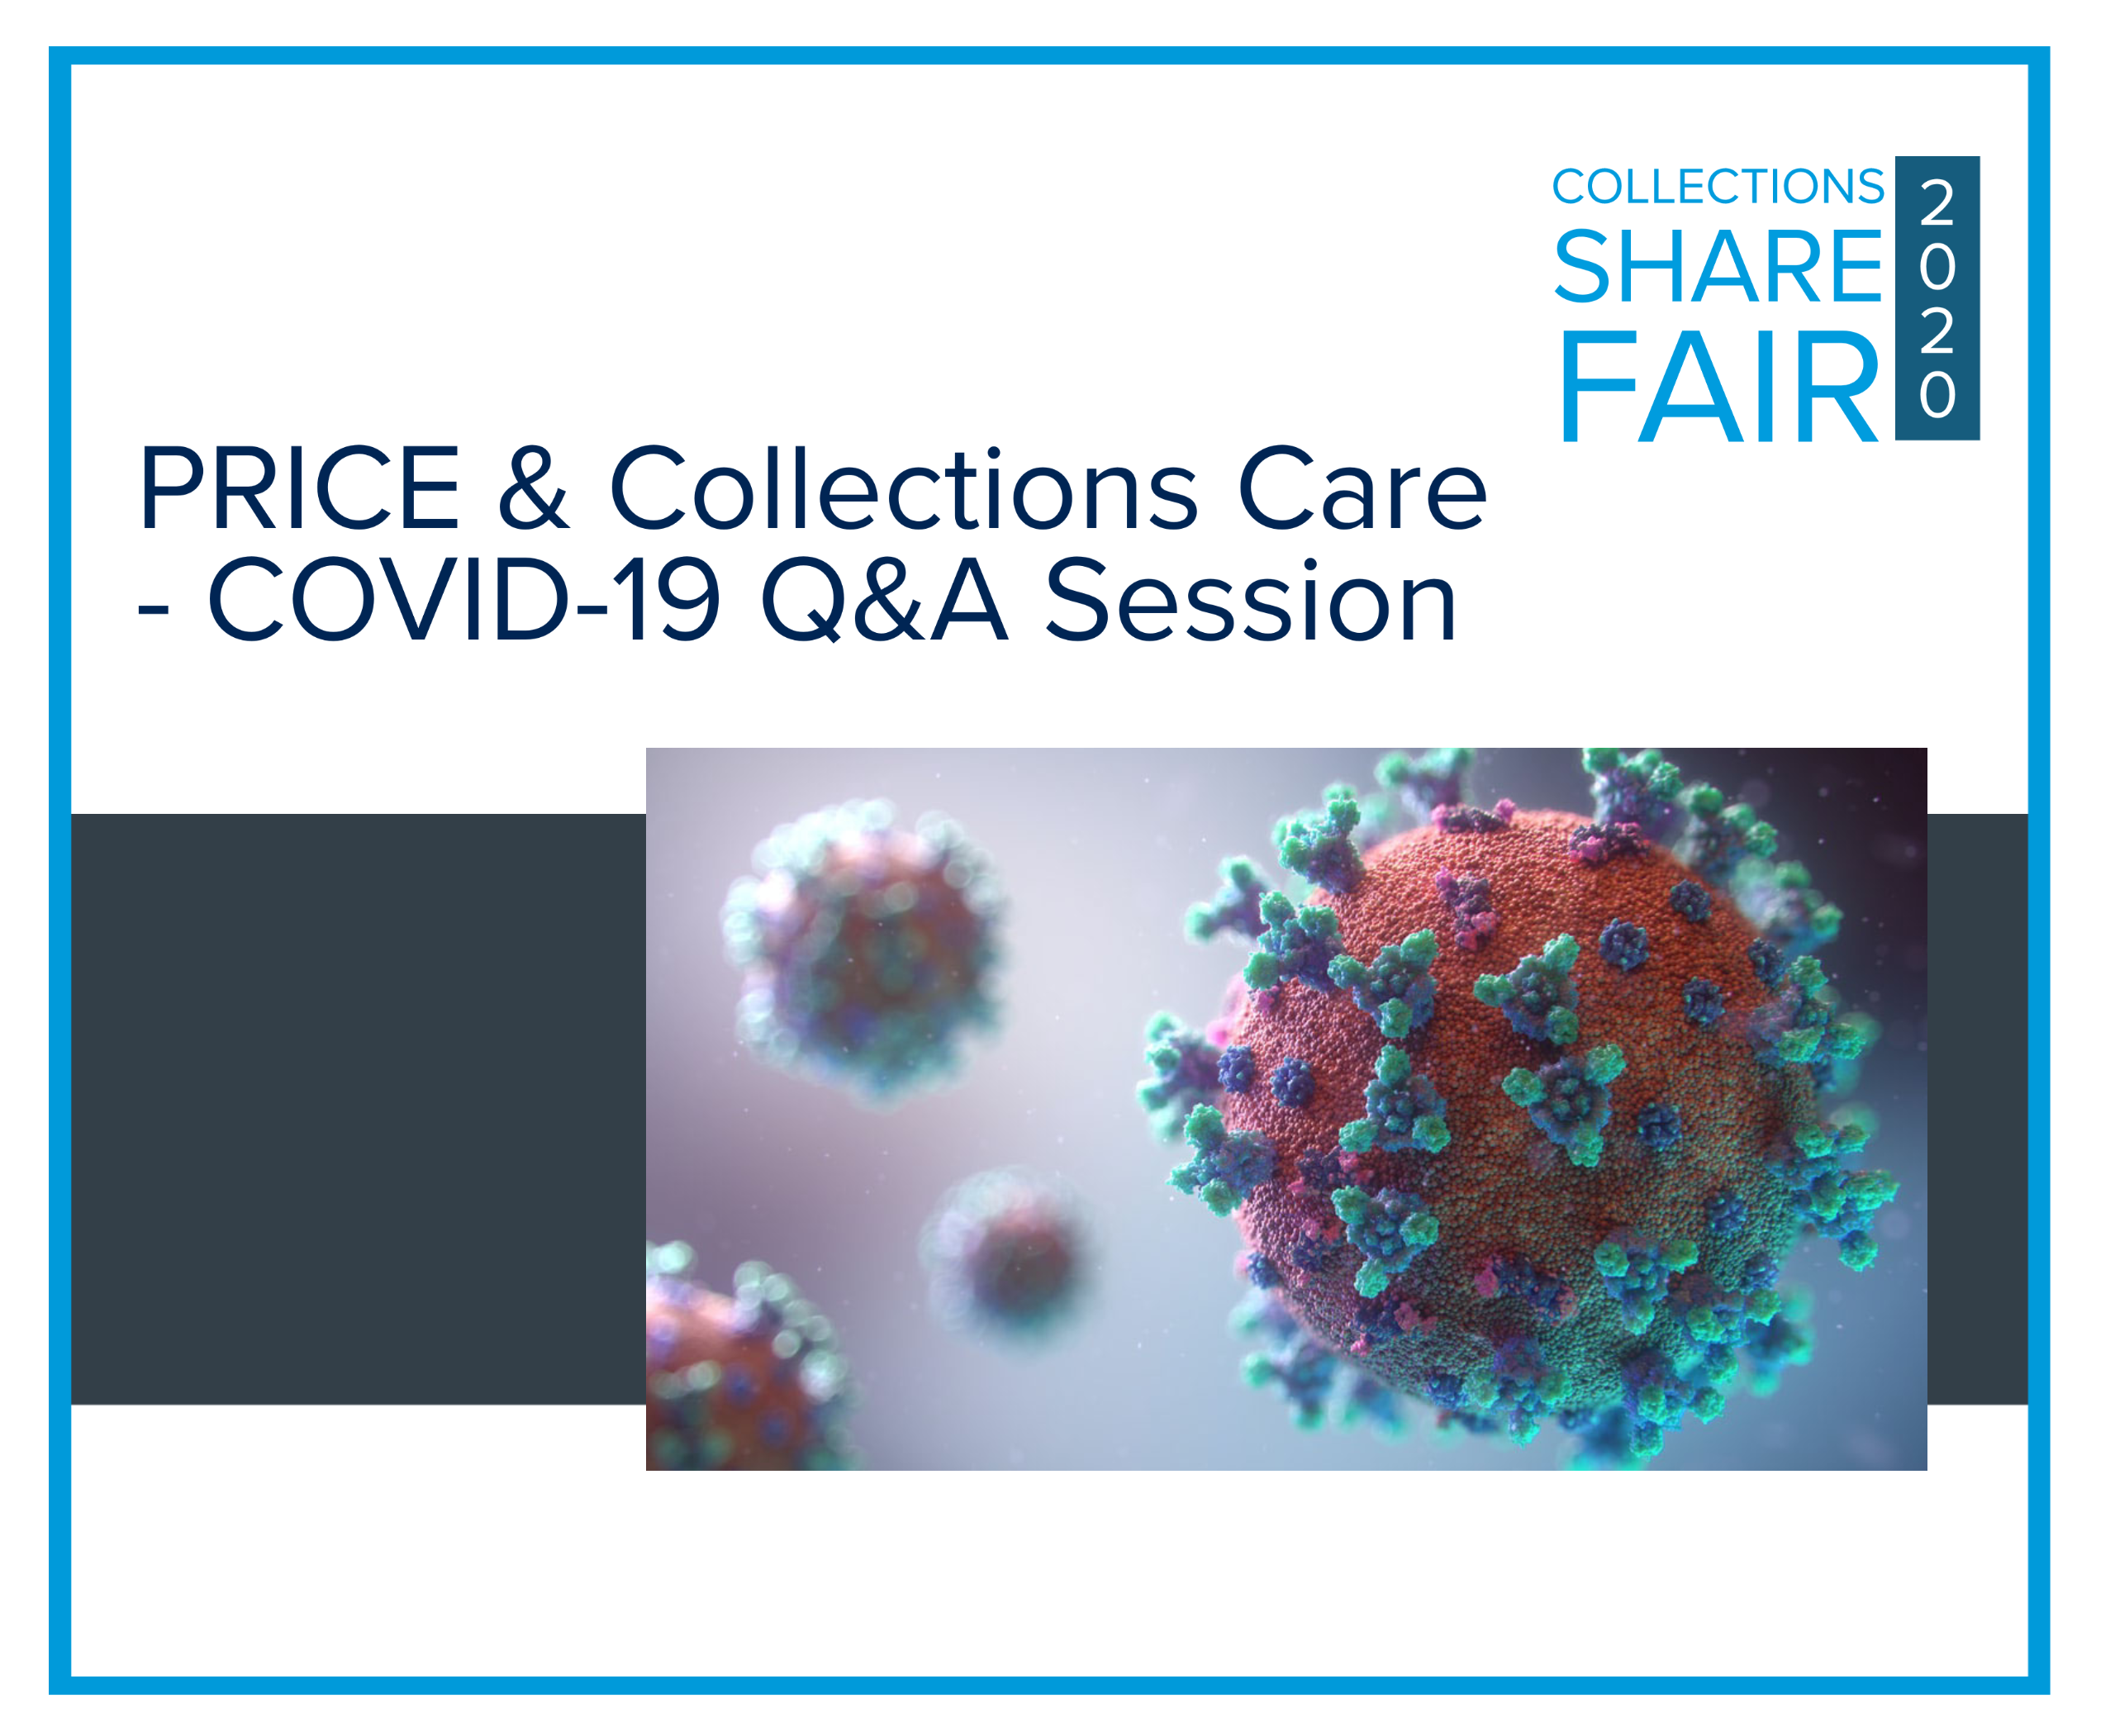 PRICE & Collections Care - COVID-19 Q&A